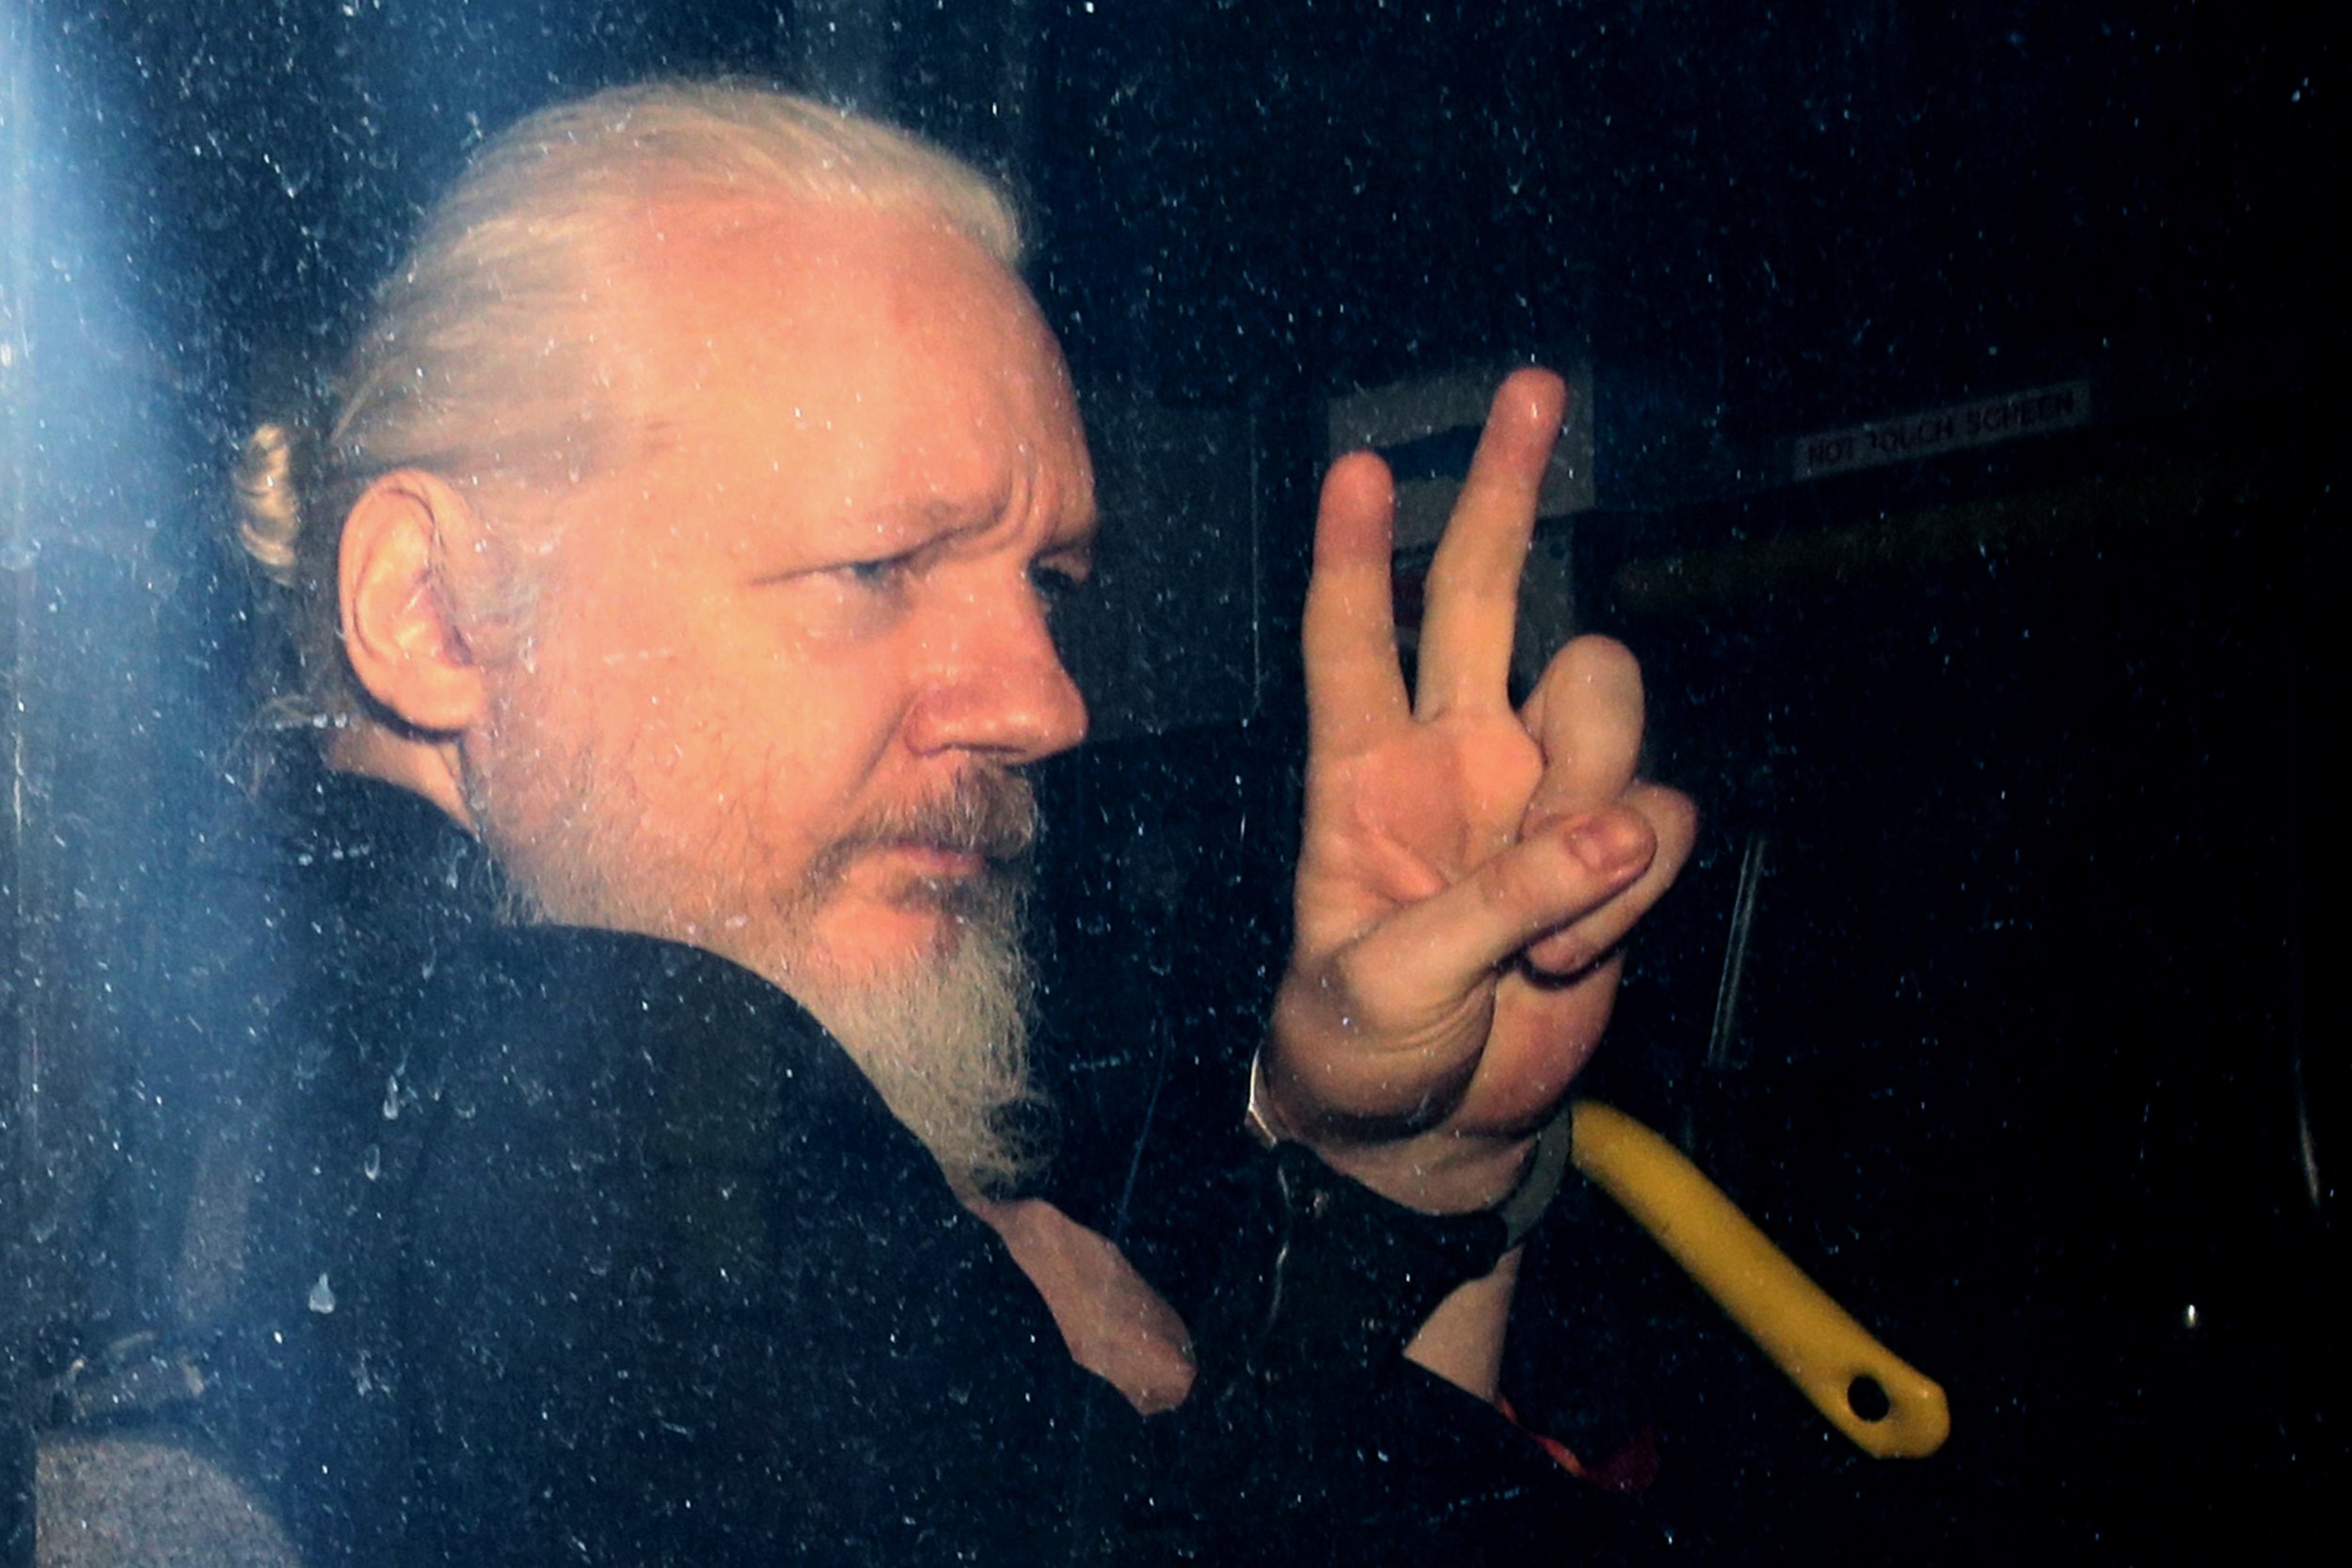 Julian Assange's Attorney Denies 'Outrageous' Claims WikiLeaks Founder